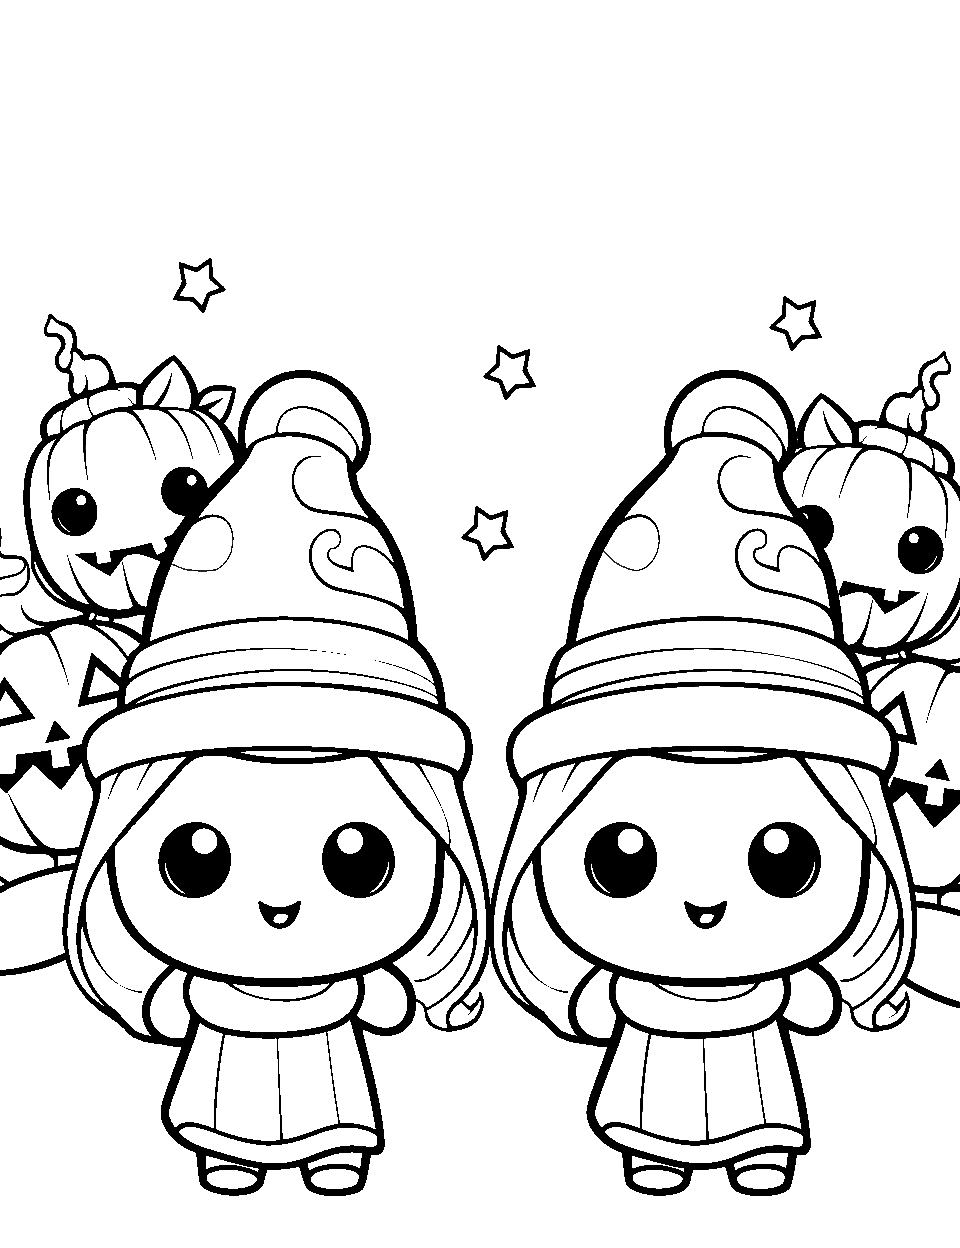 Halloween Shopkin Spooks Coloring Page - Shopkins dressed in Halloween costumes, ready for trick-or-treating.